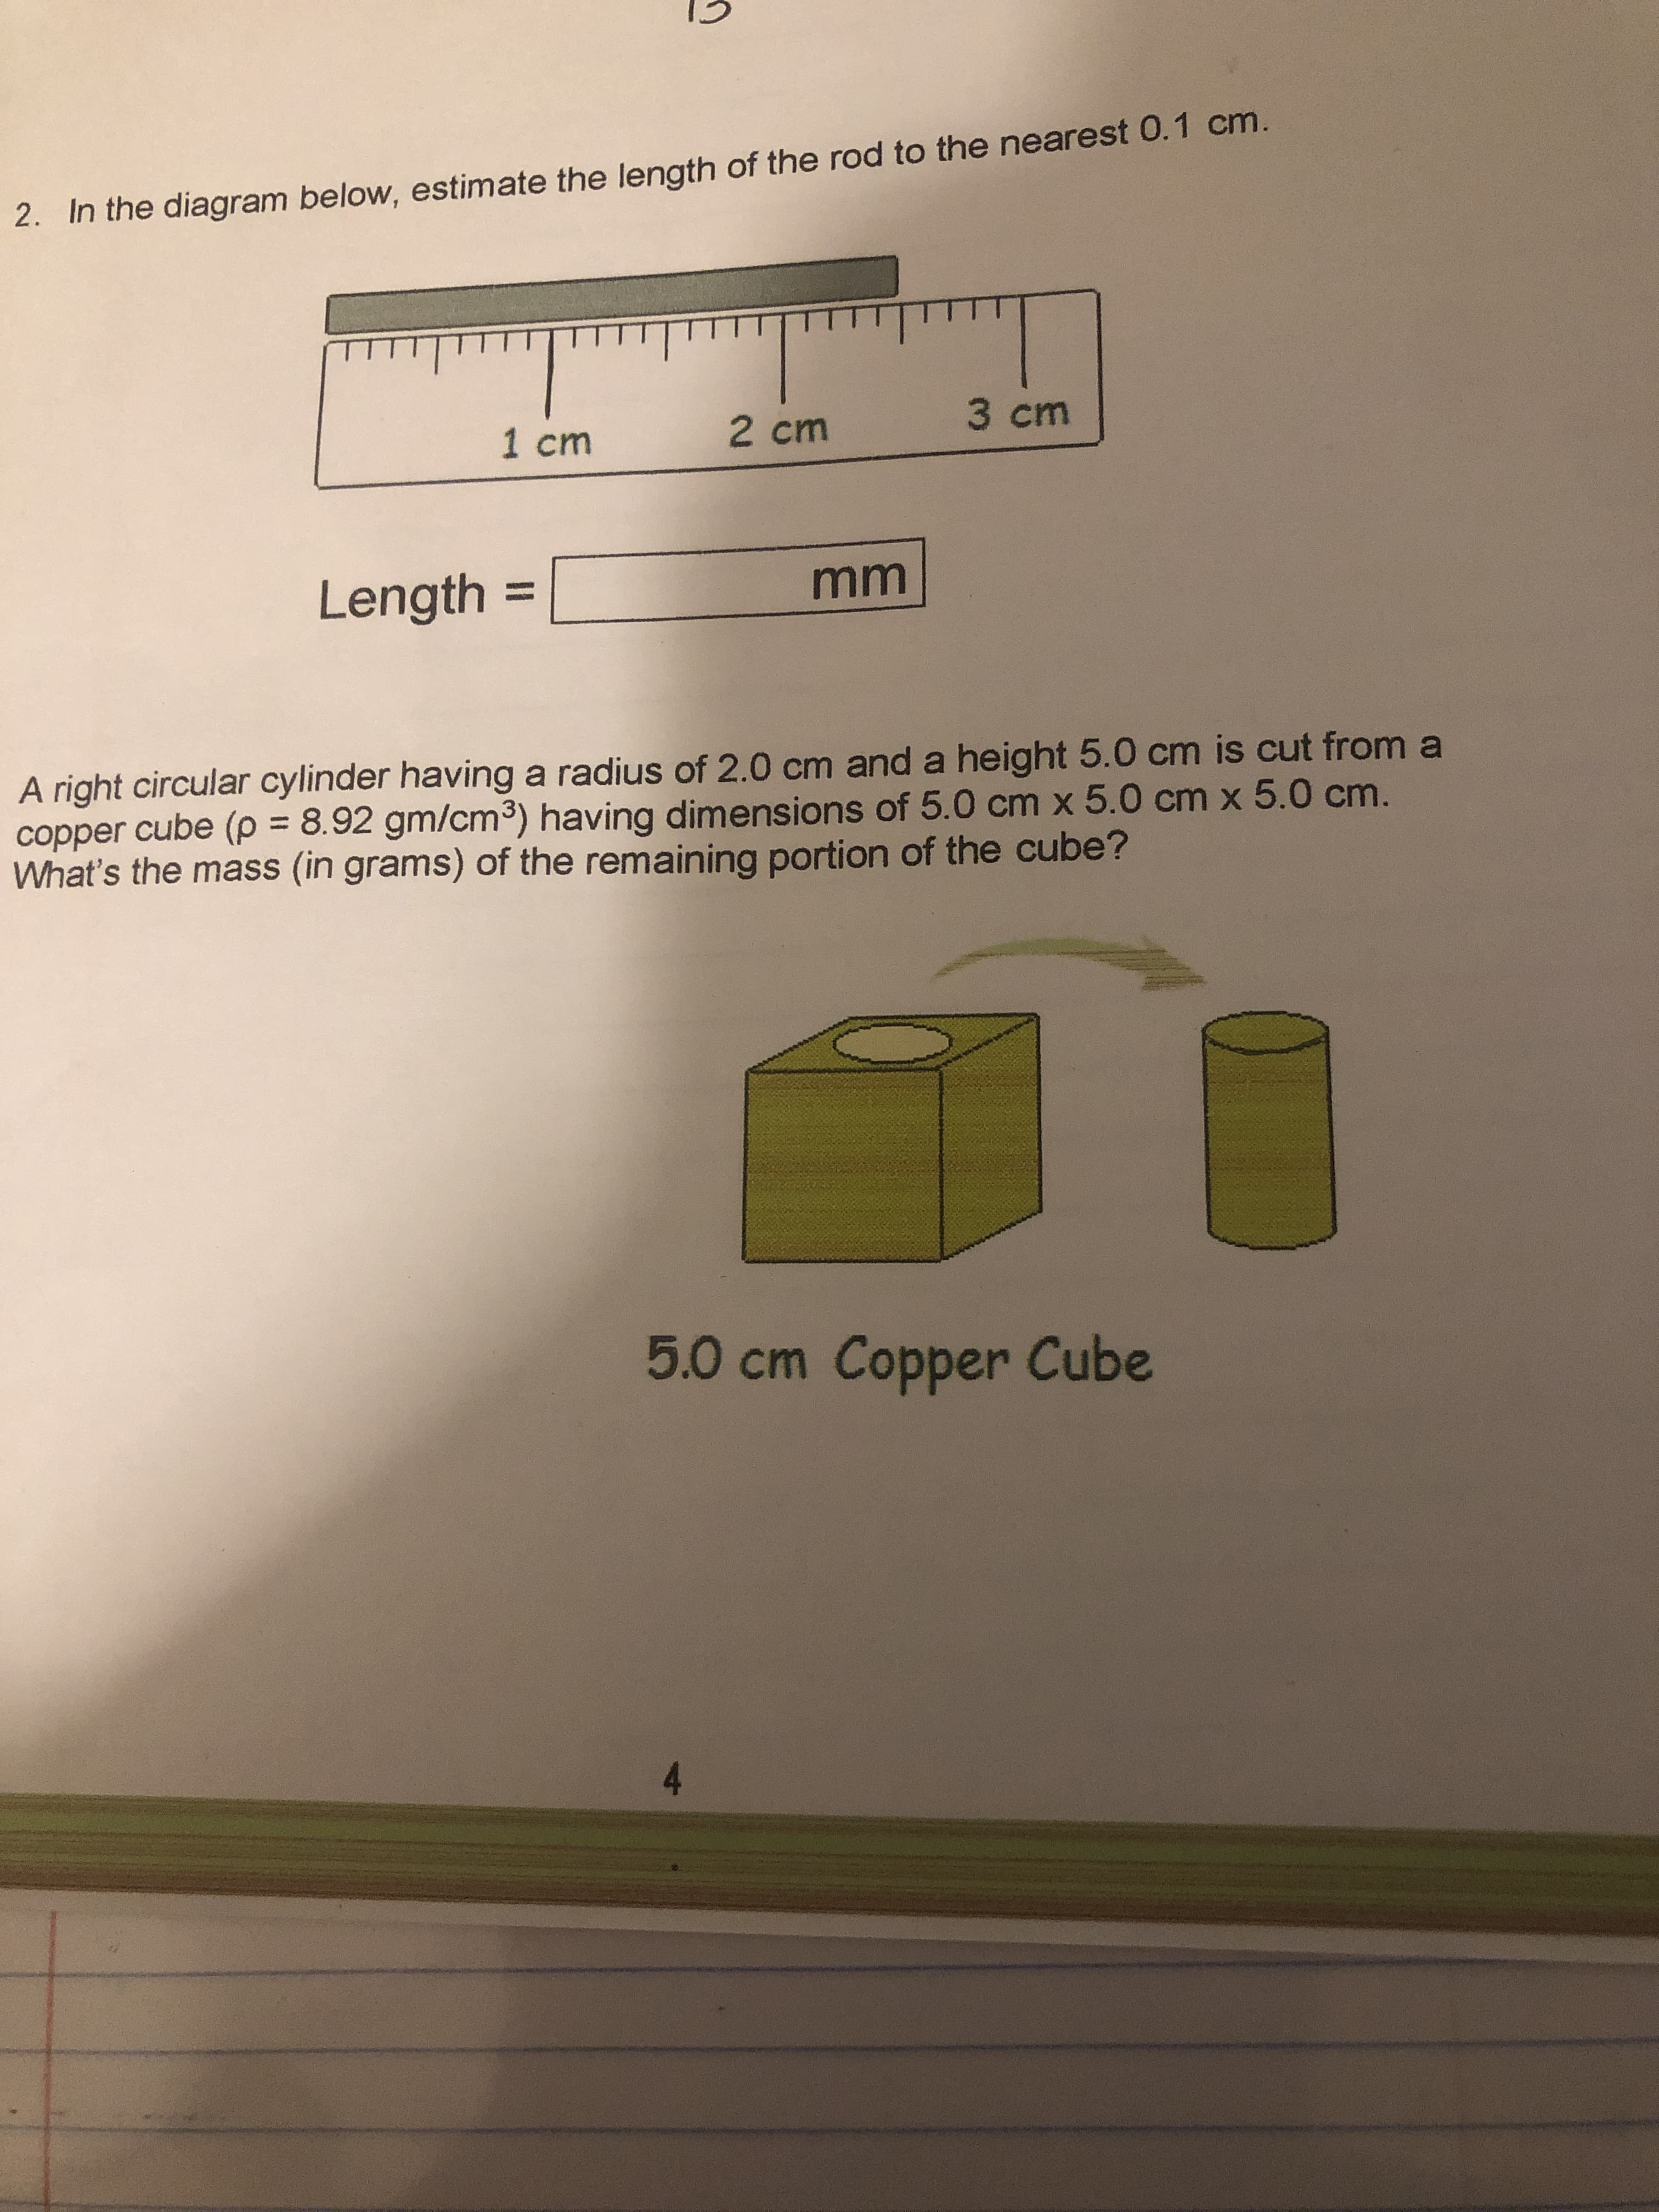 2. In the diagram below, estimate the length of the rod to the nearest 0.1 cm.
1 cm
2 cm
3 cm
Length
%3D
A right circular cylinder having a radius of 2.0 cm and a height 5.0 cm is cut from a
copper cube (p = 8.92 gm/cm³) having dimensions of 5.0 cm x 5.0 cm x 5.0 cm.
What's the mass (in grams) of the remaining portion of the cube?
%3D
ID
5.0 cm Copper Cube
4.
